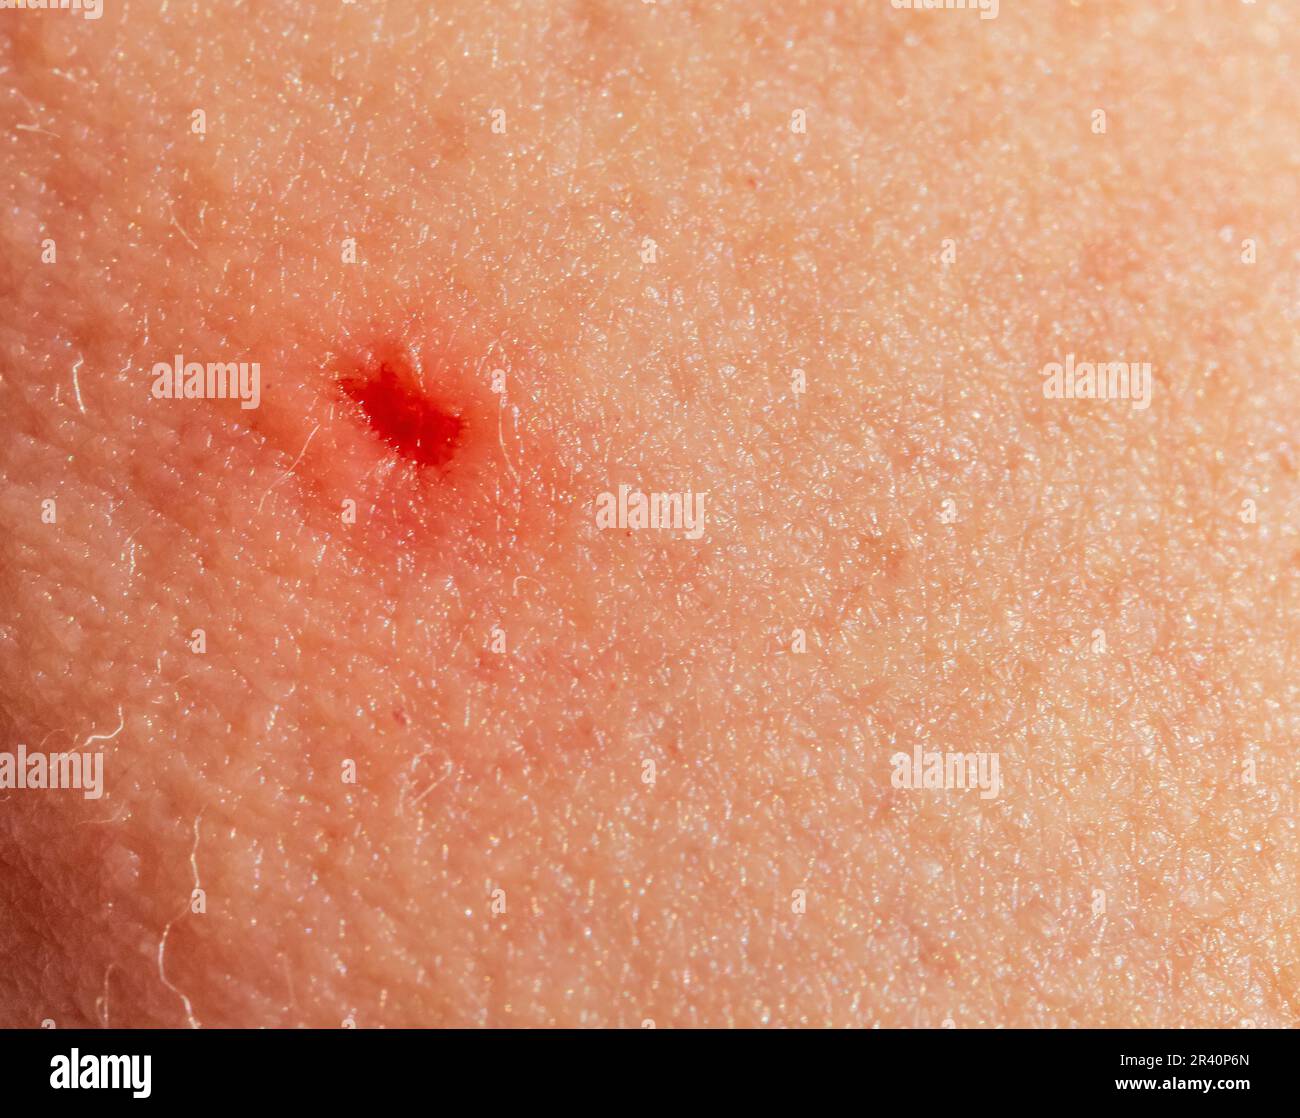 1,069 Spider Bite On Skin Images, Stock Photos, 3D objects, & Vectors